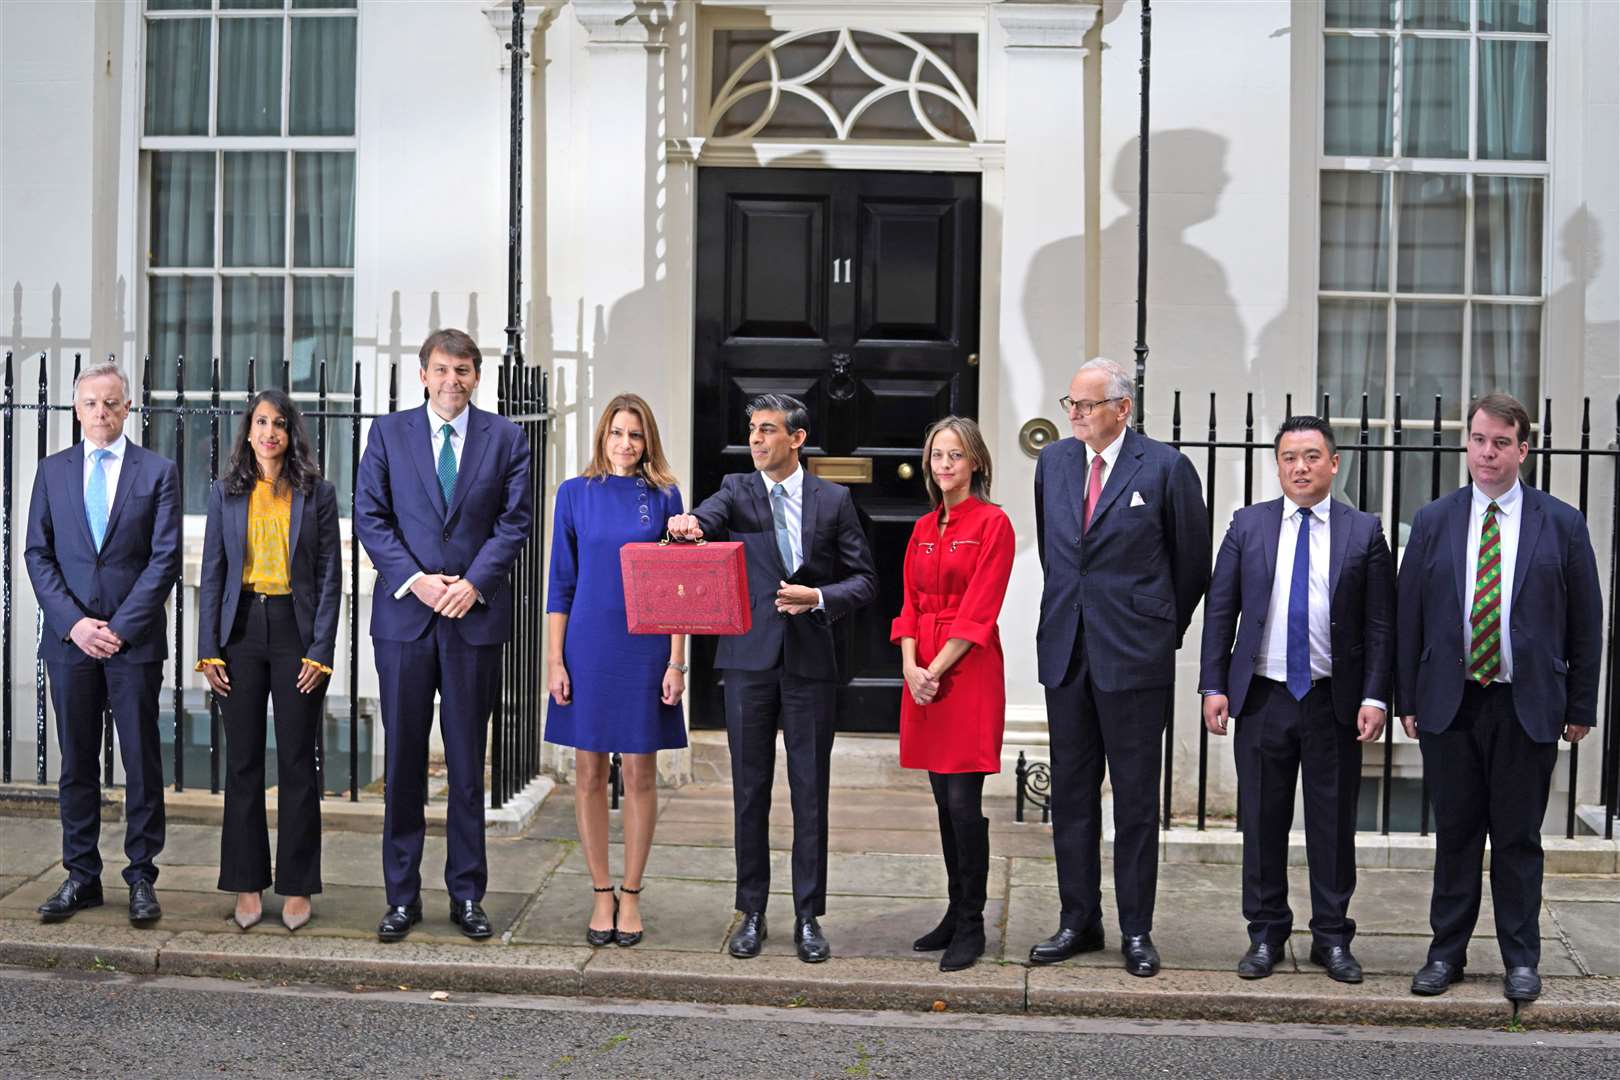 Chancellor Rishi Sunak with his ministerial team and parliamentary private secretaries leaving 11 Downing Street before delivering his Budget to the House of Commons (Jacob King/PA)